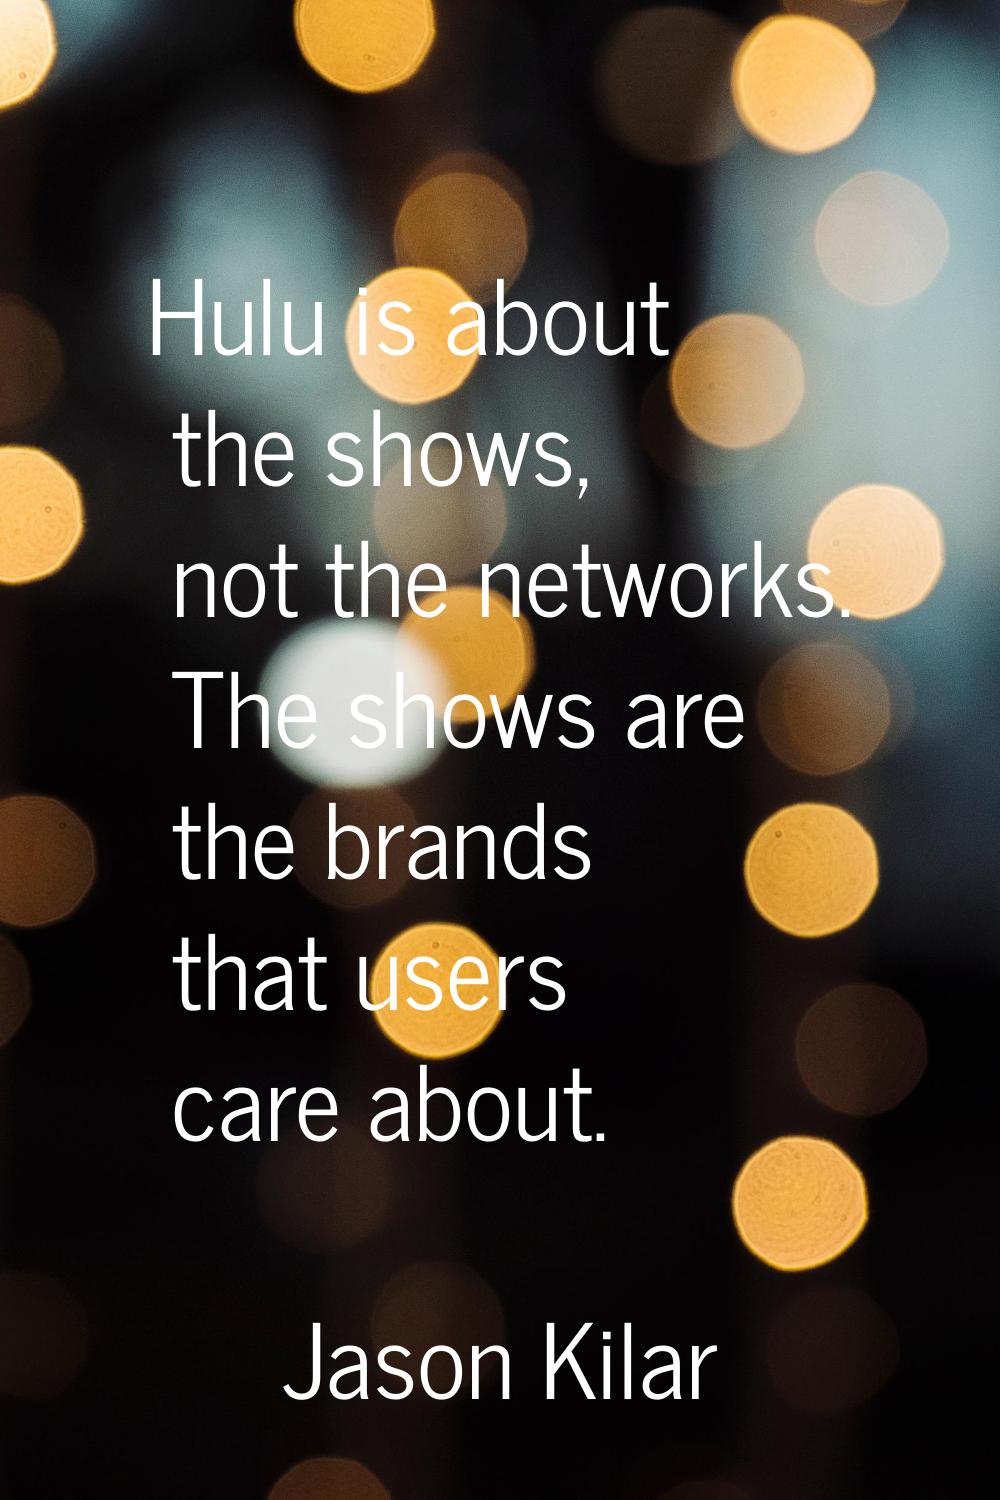 Hulu is about the shows, not the networks. The shows are the brands that users care about.